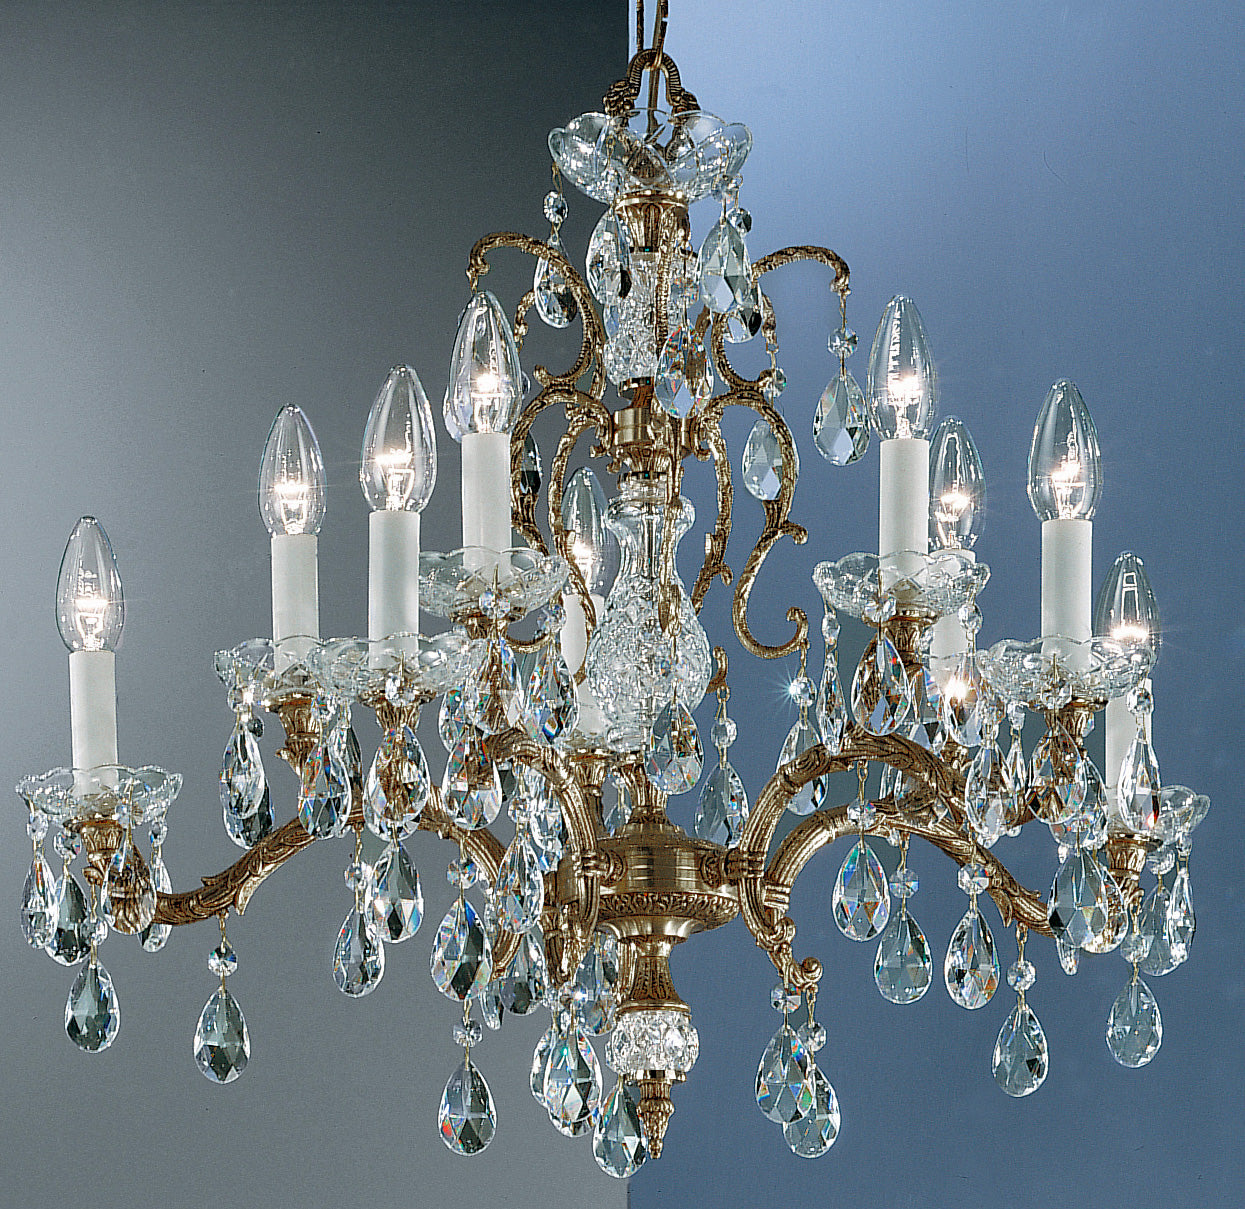 Classic Lighting 5530 RB S Madrid Crystal/Cast Brass Chandelier in Roman Bronze (Imported from Spain)